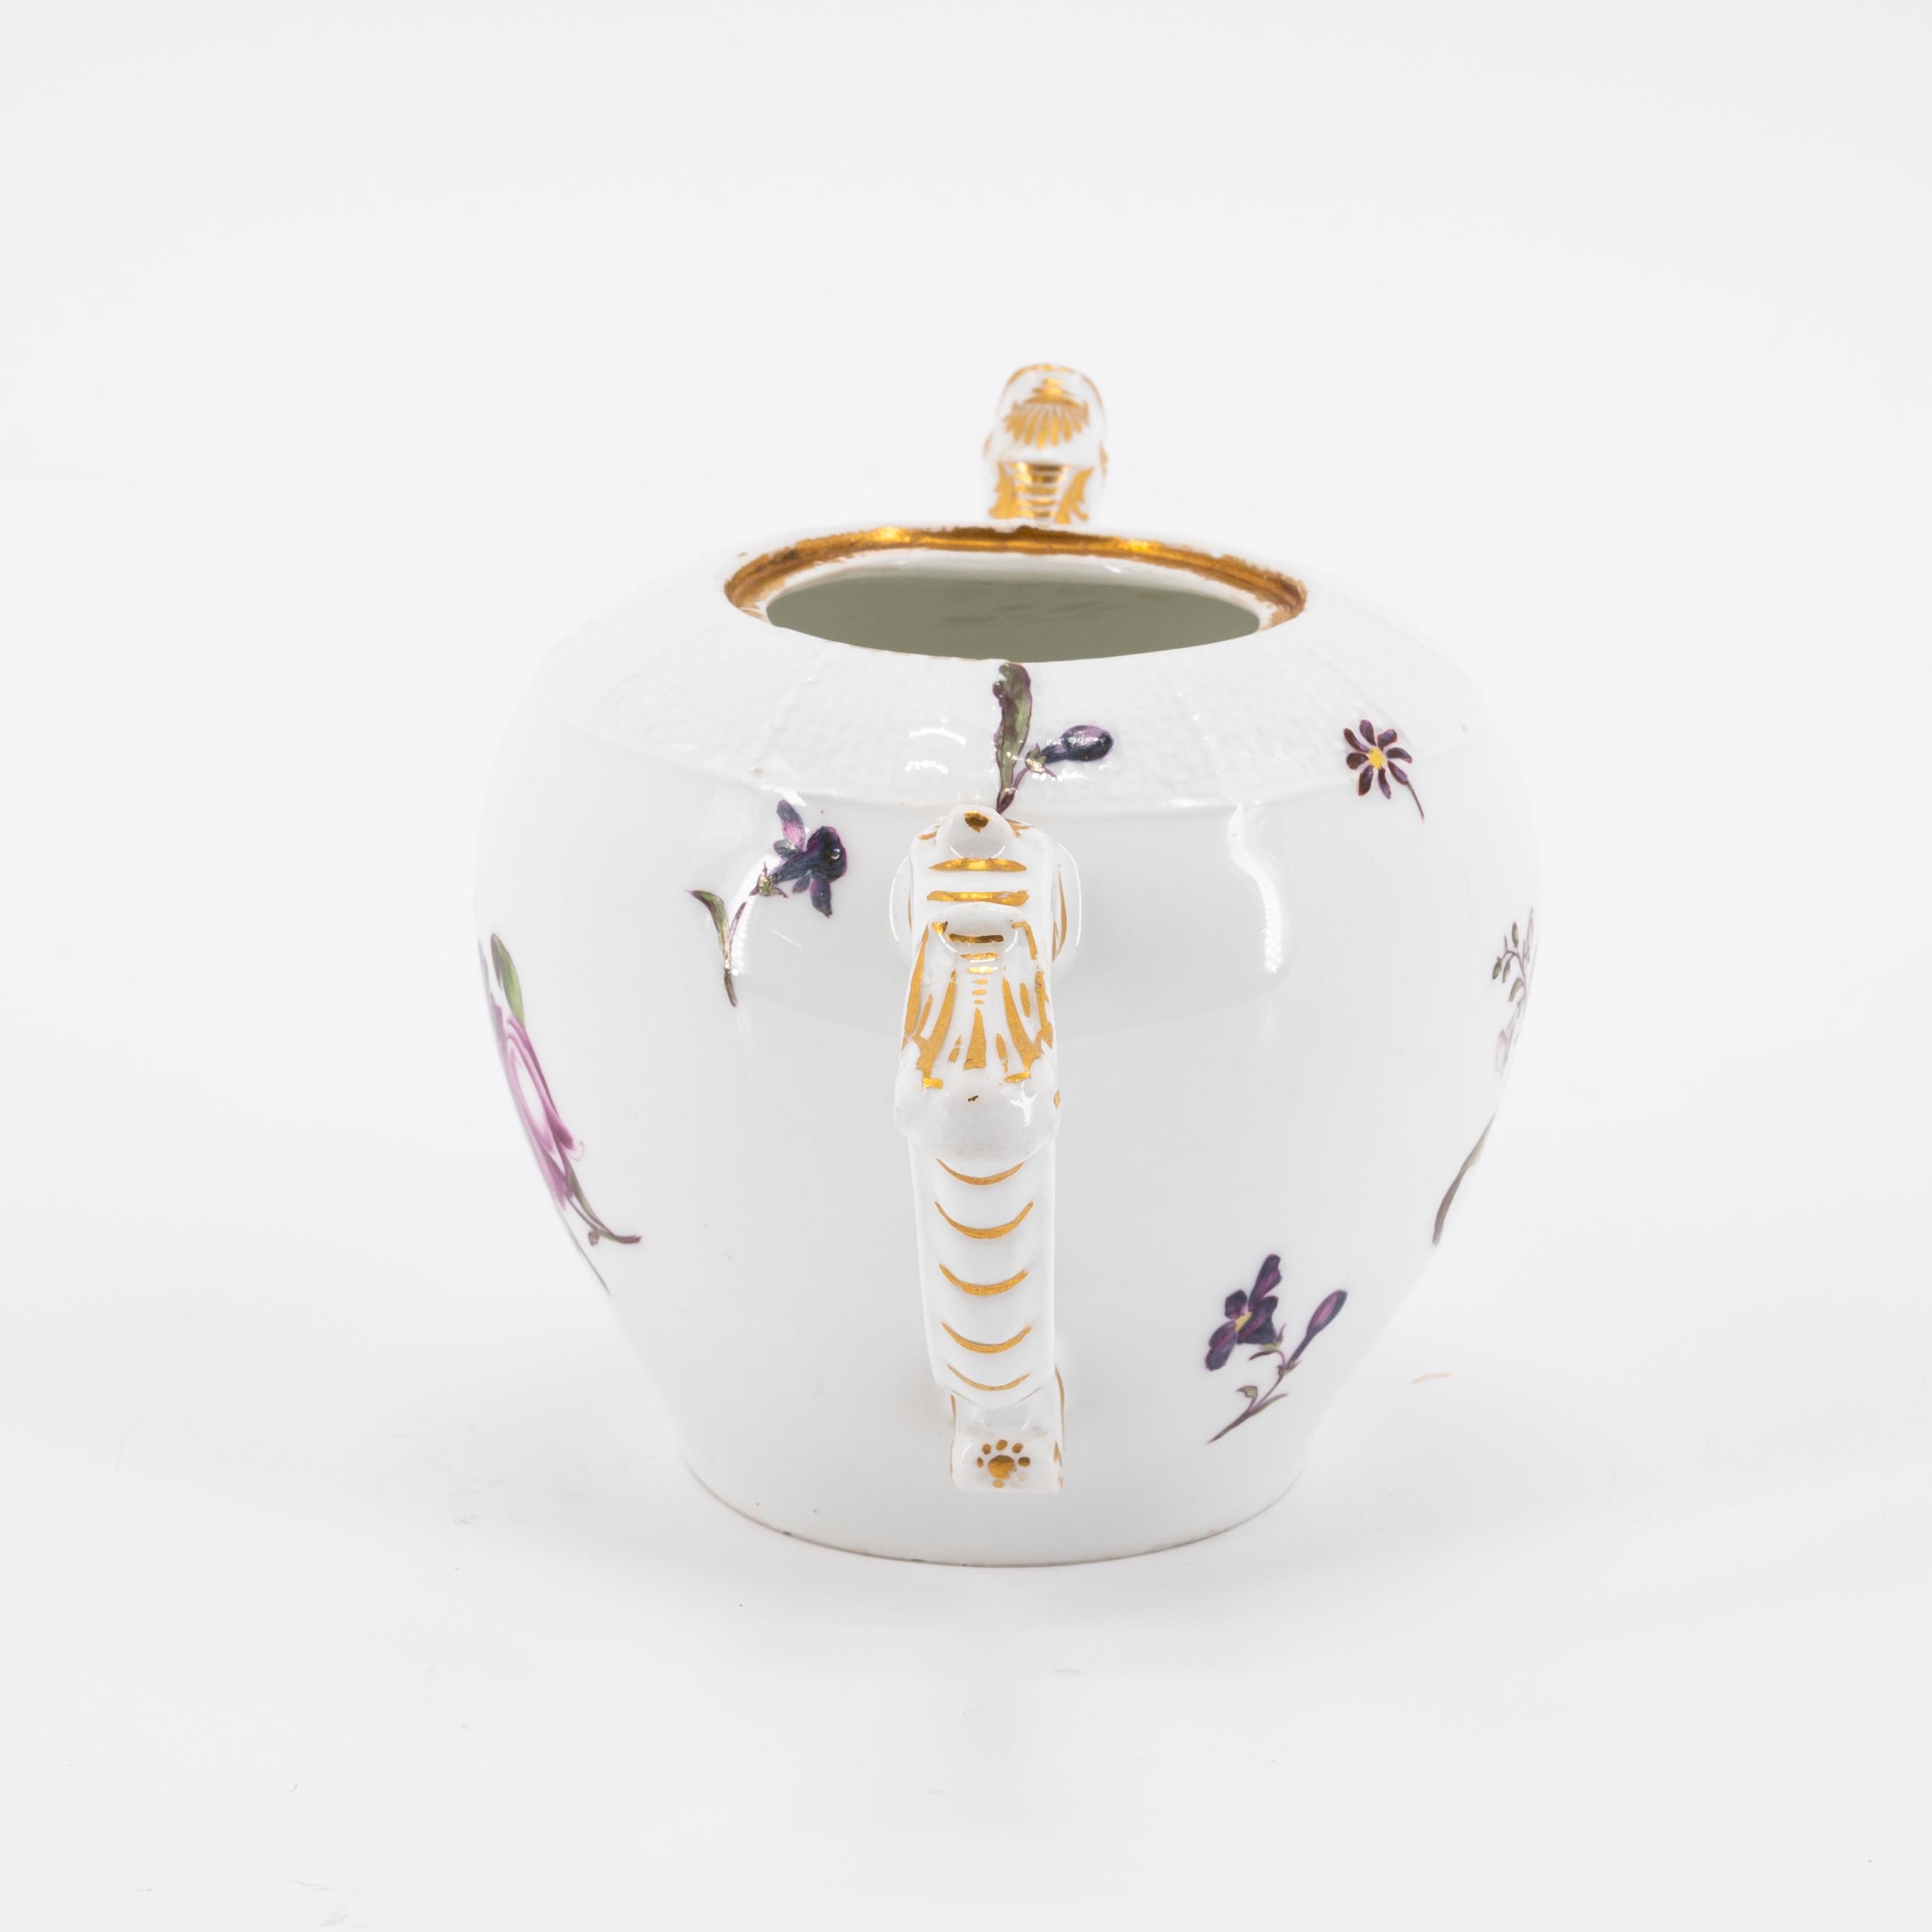 LARGE PORCELAIN LIDDED BOWL WITH FLOWER KNOB, SMALL TEA POT WITH WOODCUT FLOWERS AND CUP WITH SAUCER - Image 7 of 18